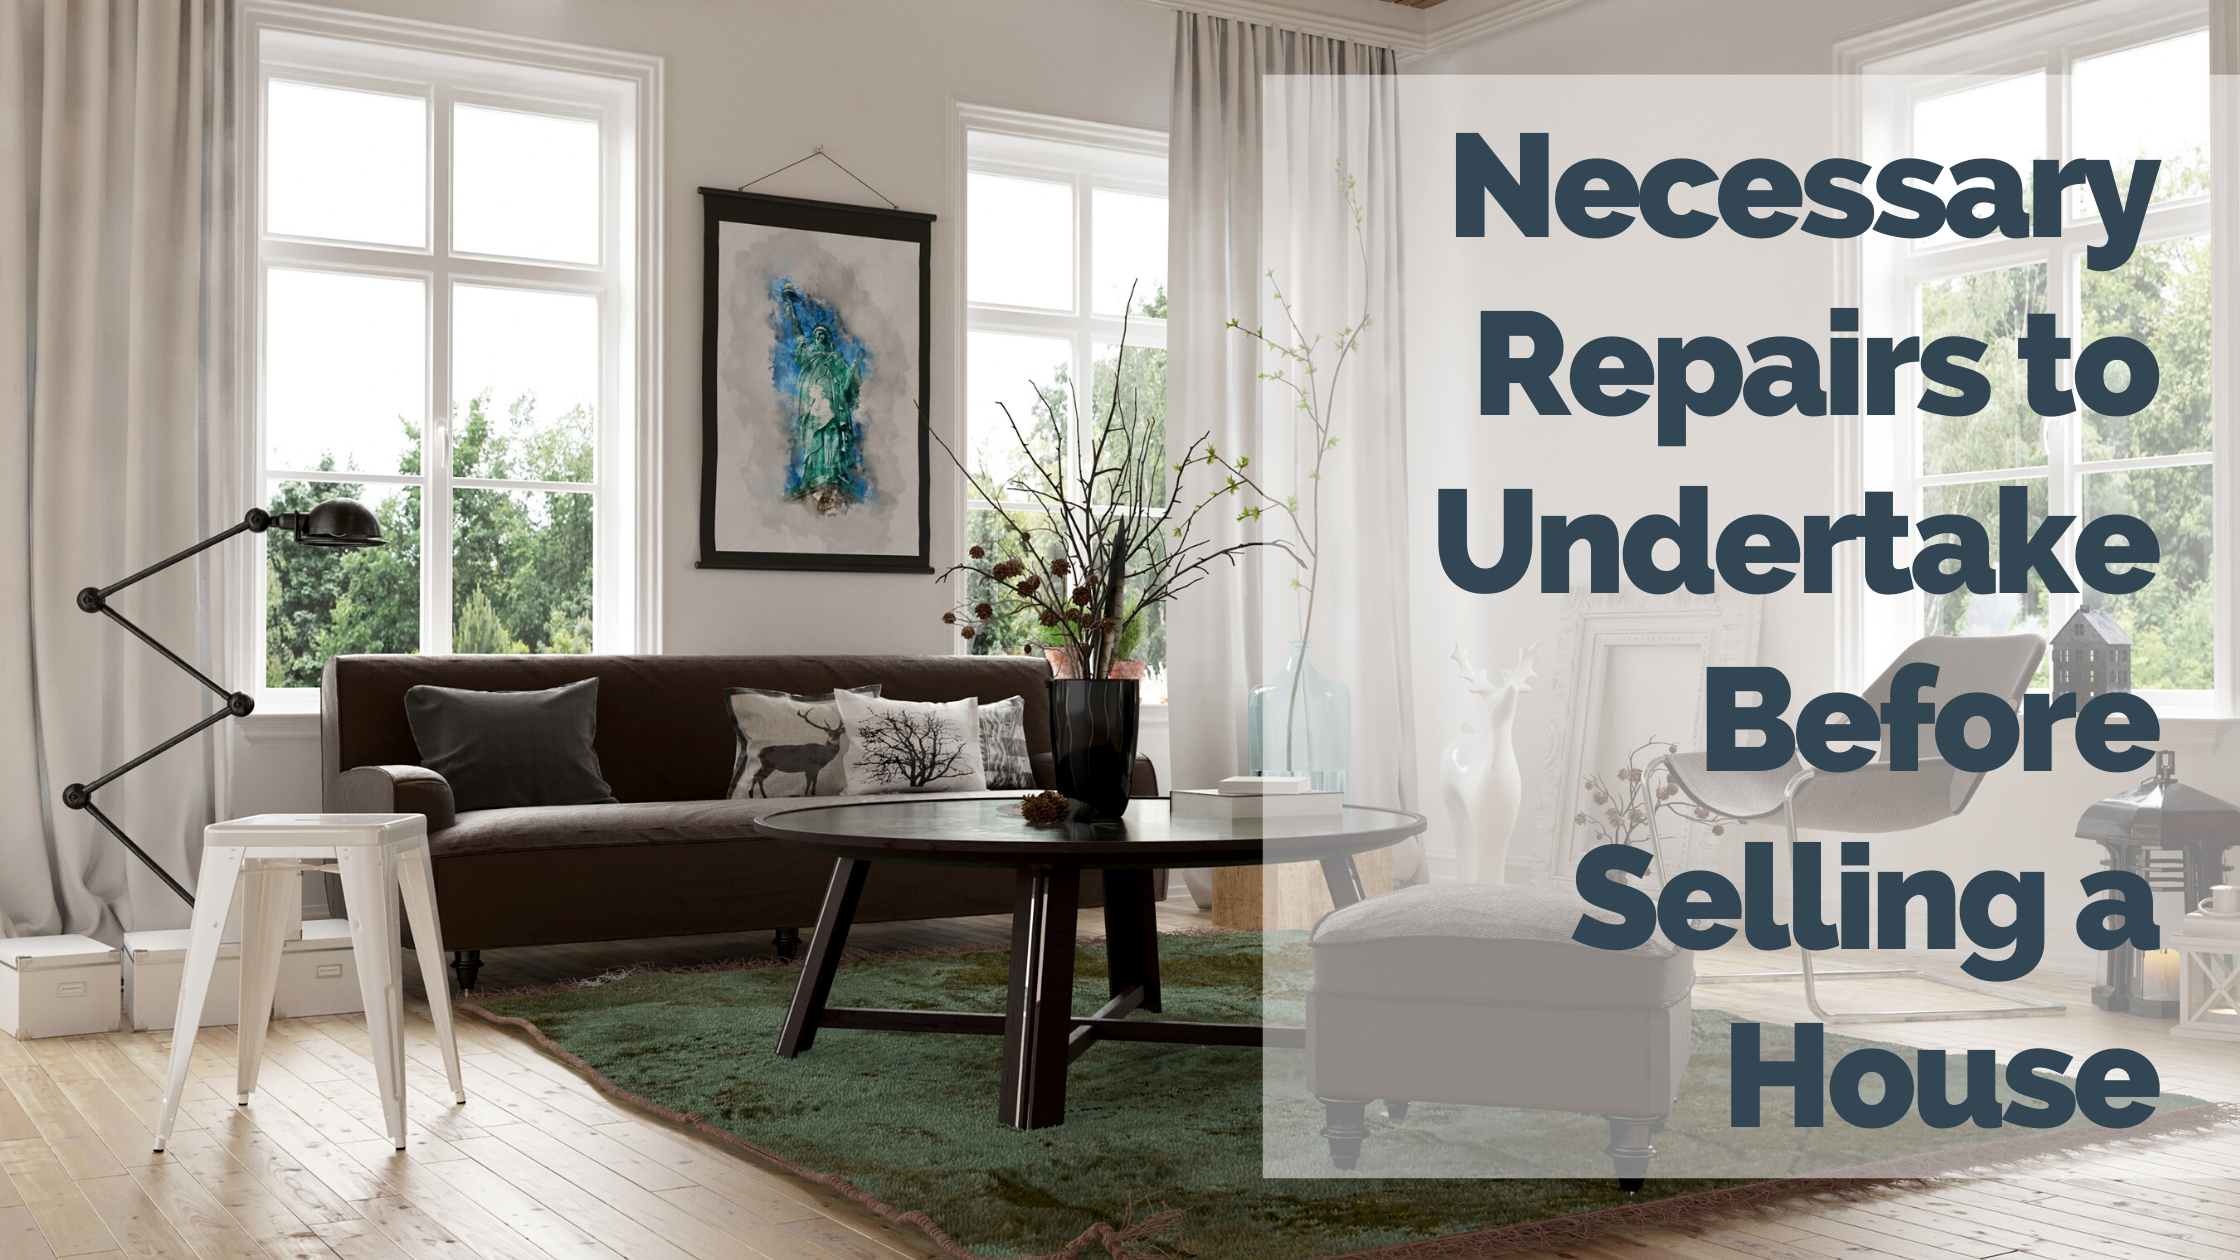 Necessary Repairs to Undertake Before Selling a House